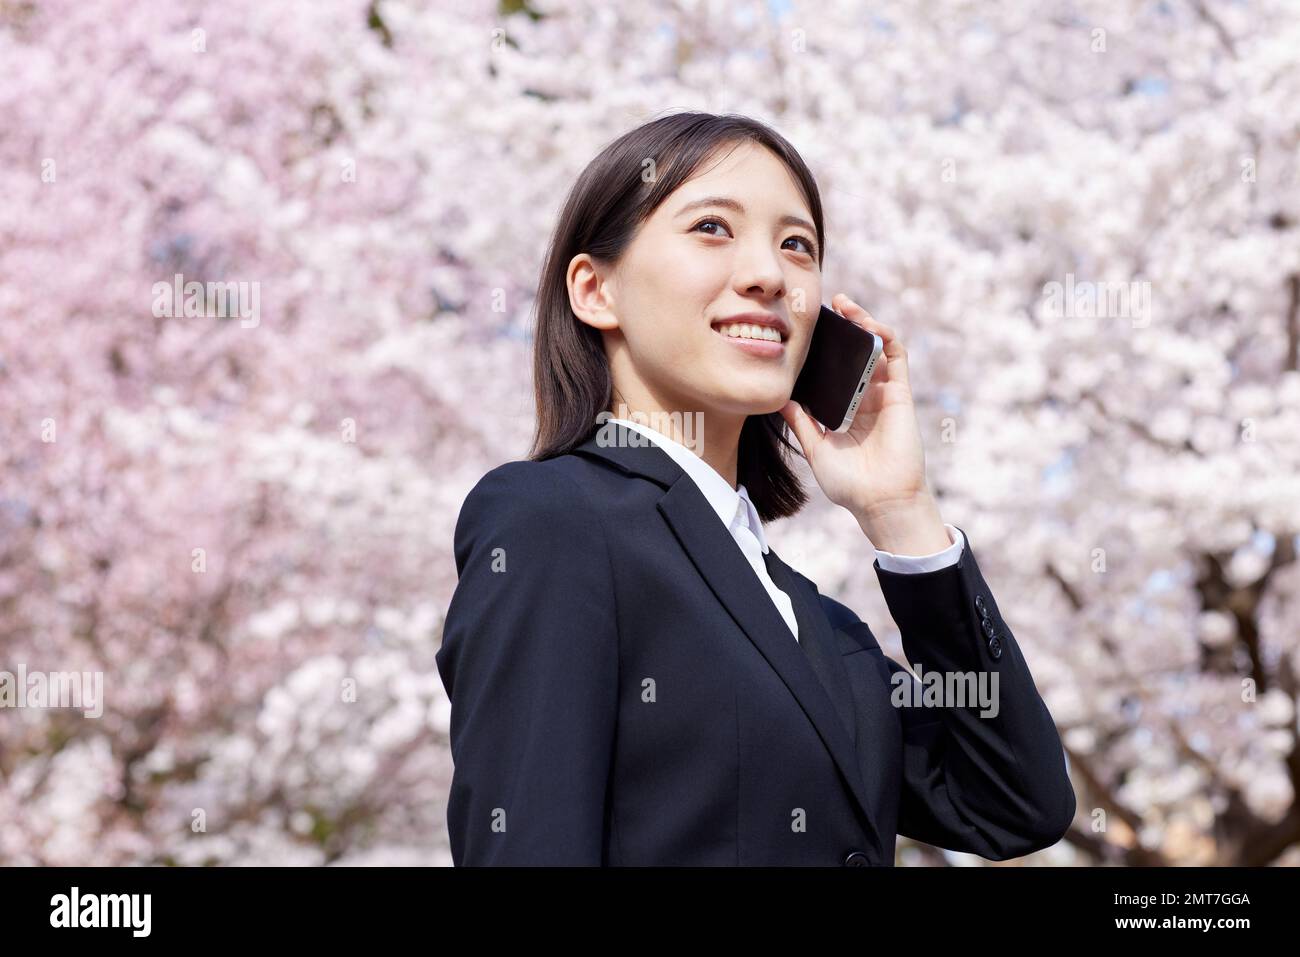 Japanese businesswoman with cherry blossoms in full bloom Stock Photo